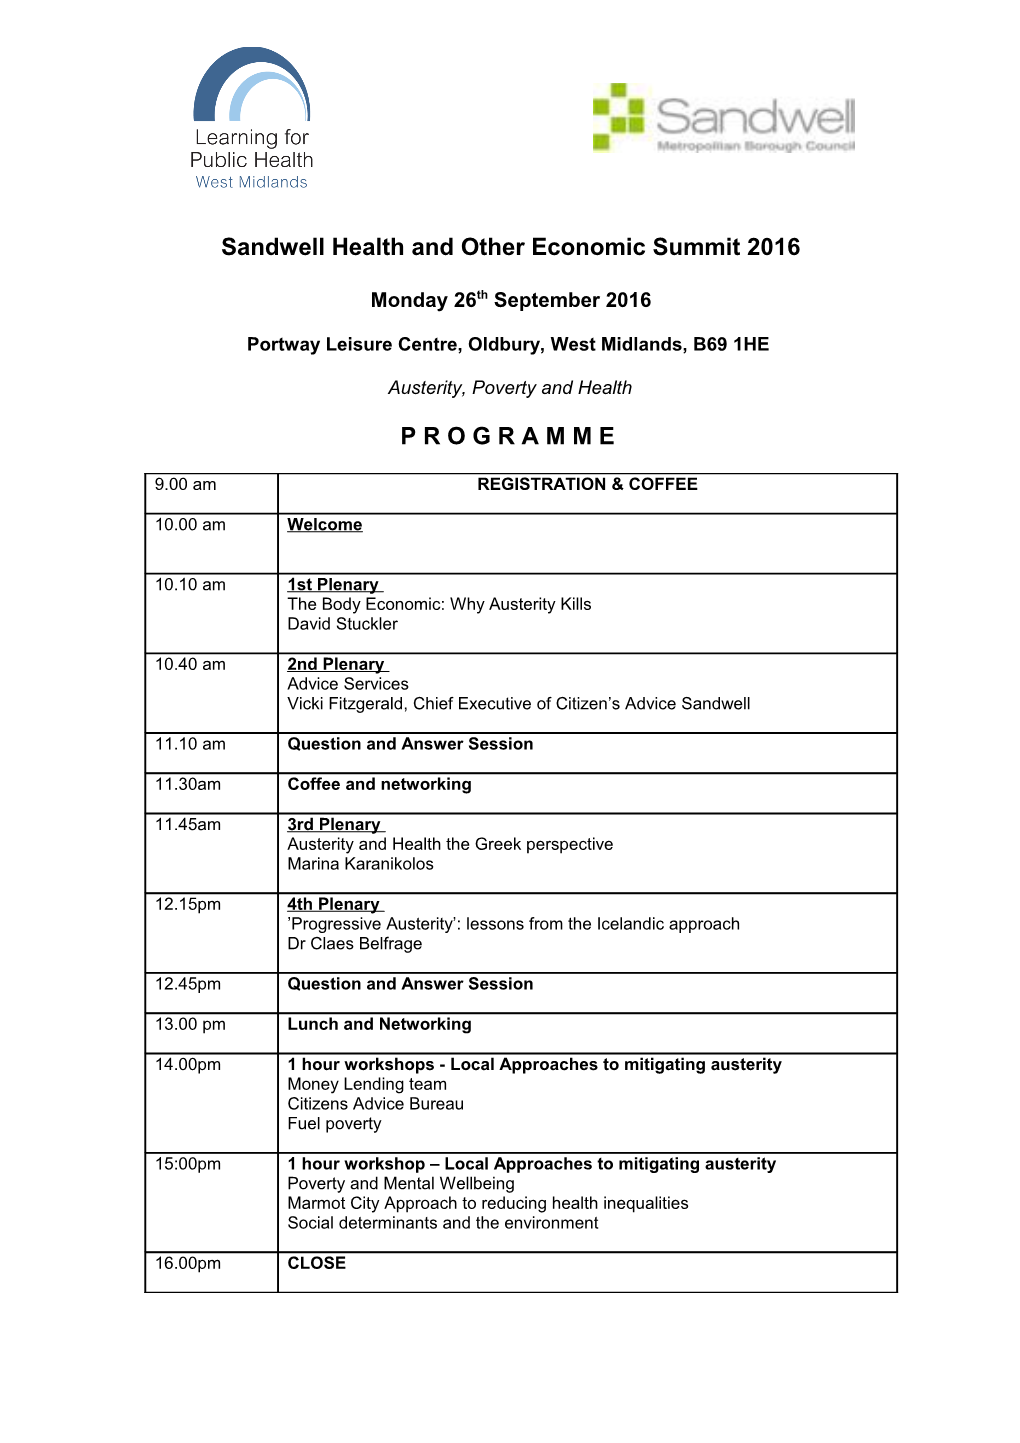 Sandwell Health and Other Economic Summit 2016